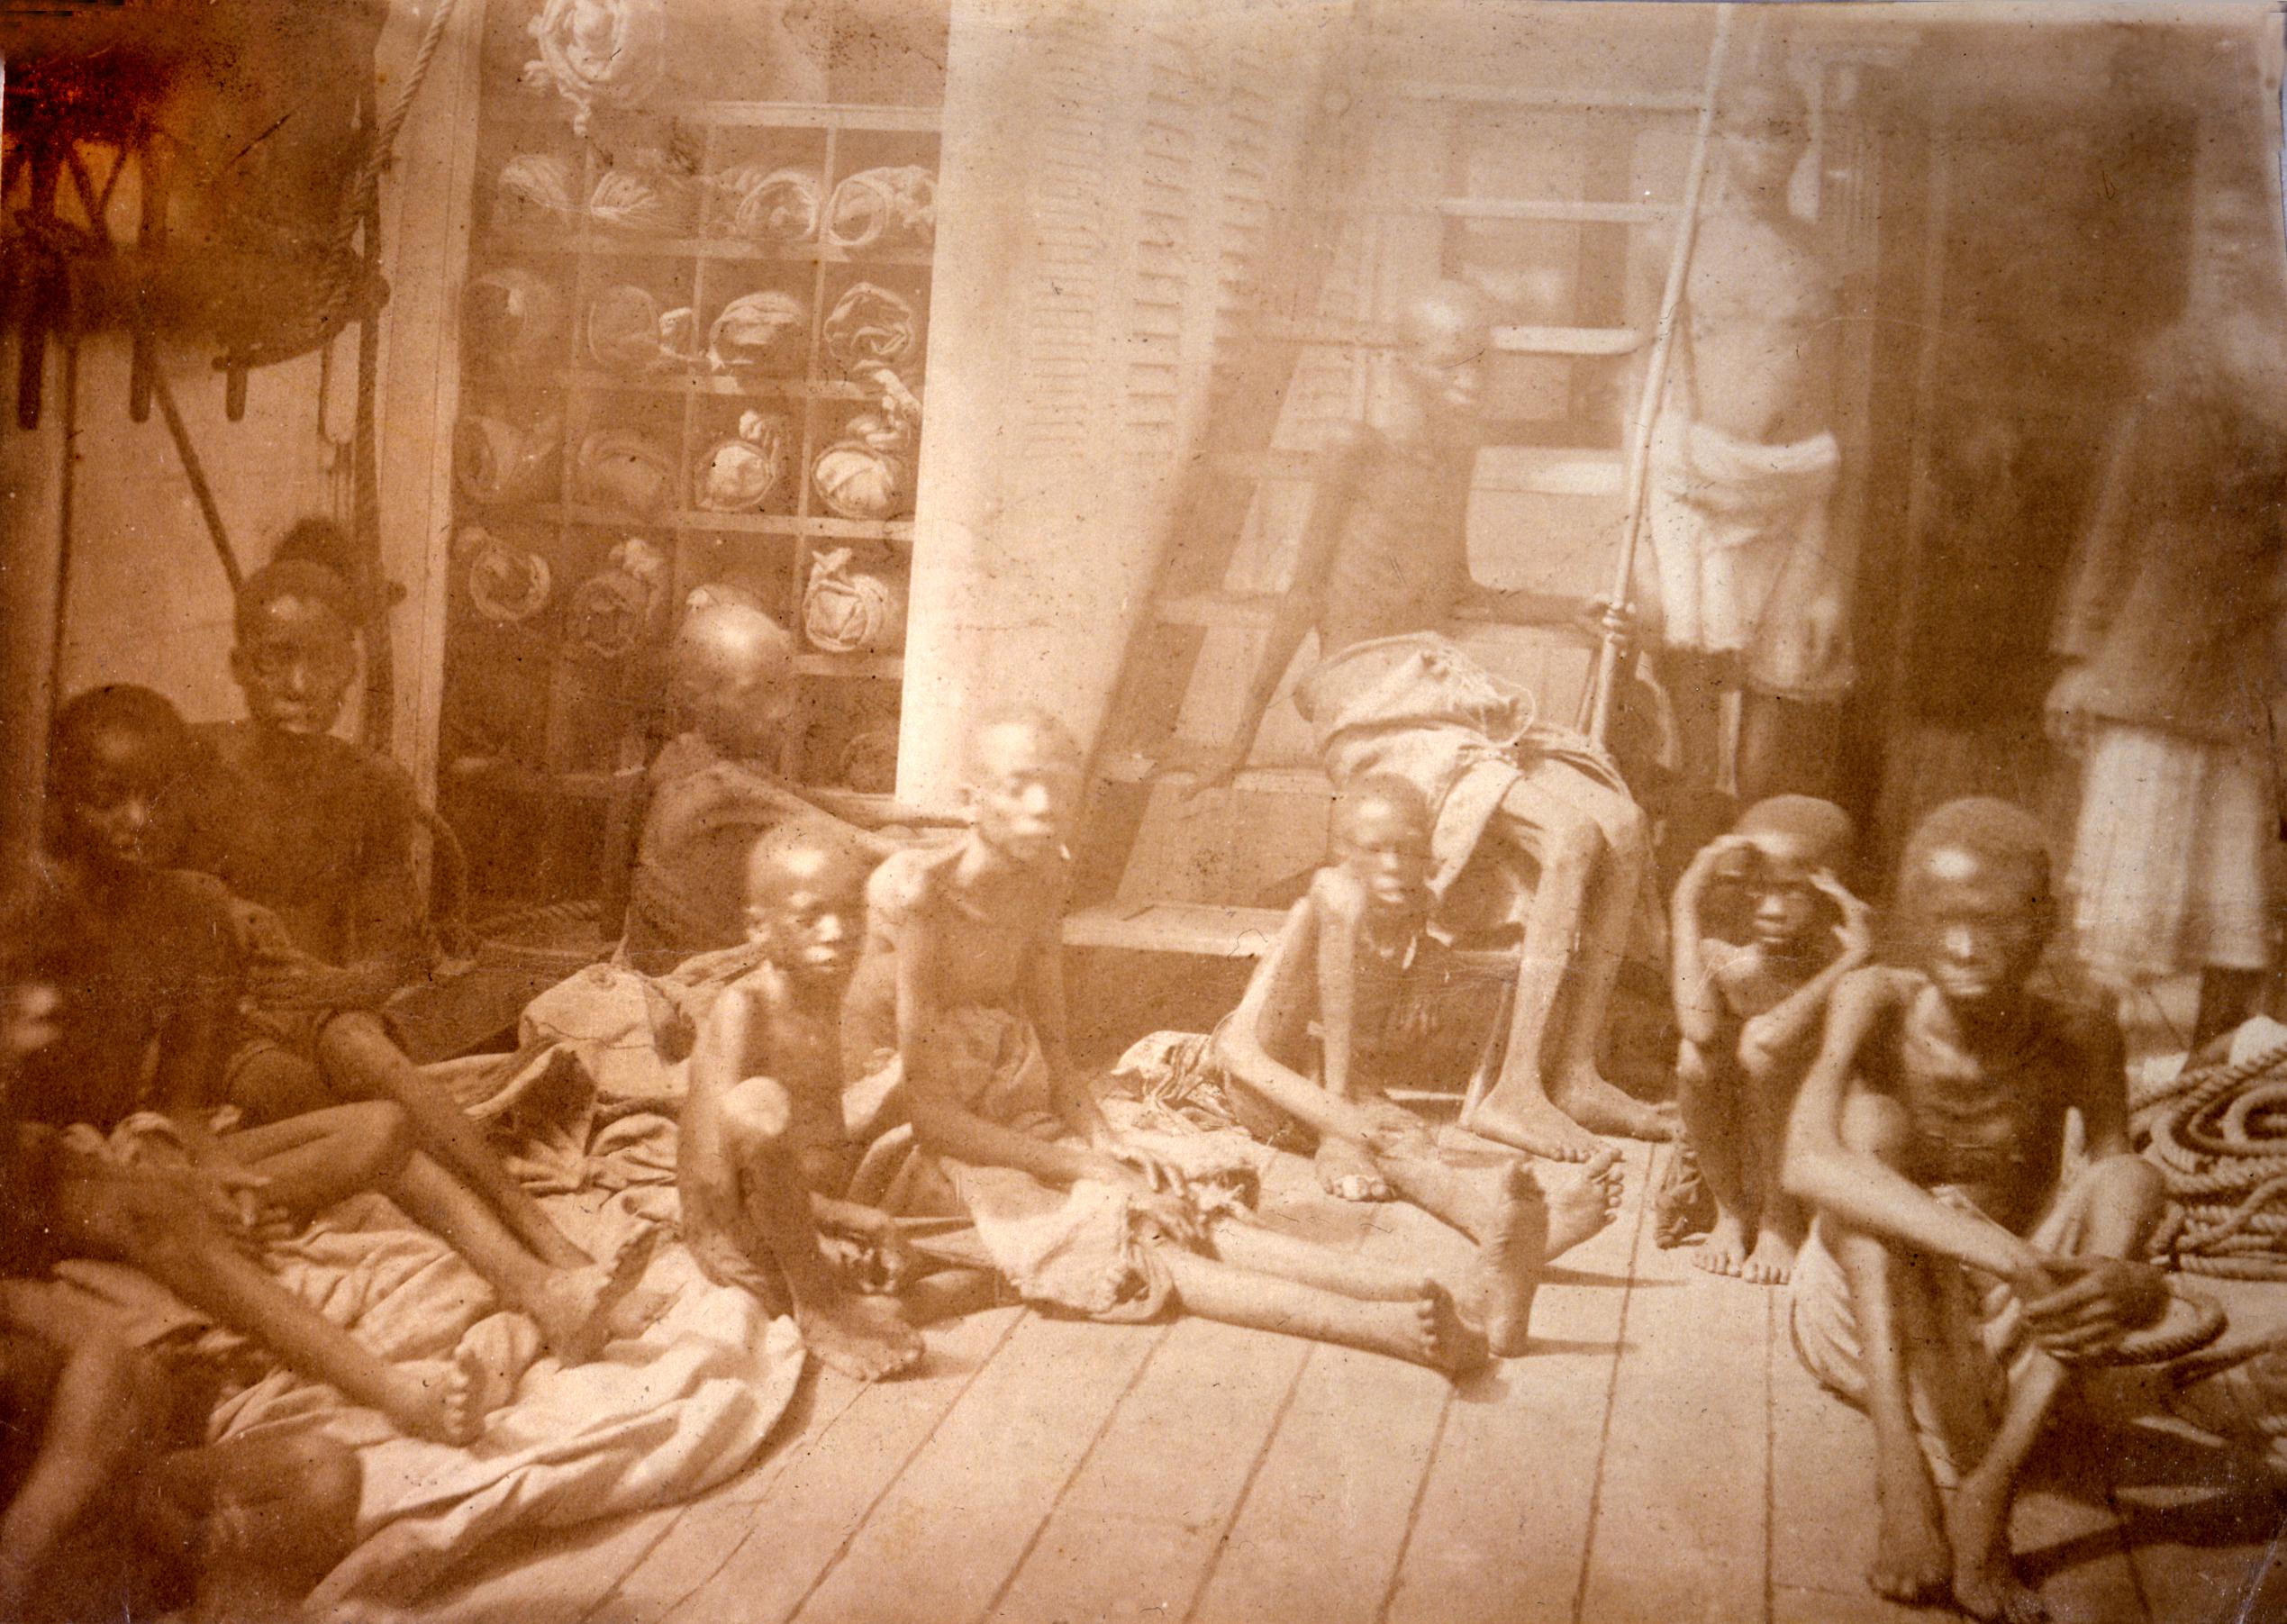 Sepia-toned photograph of a group of enslaved children sitting on the deck of a wooden ship. They are dressed in rags and appear emaciated.